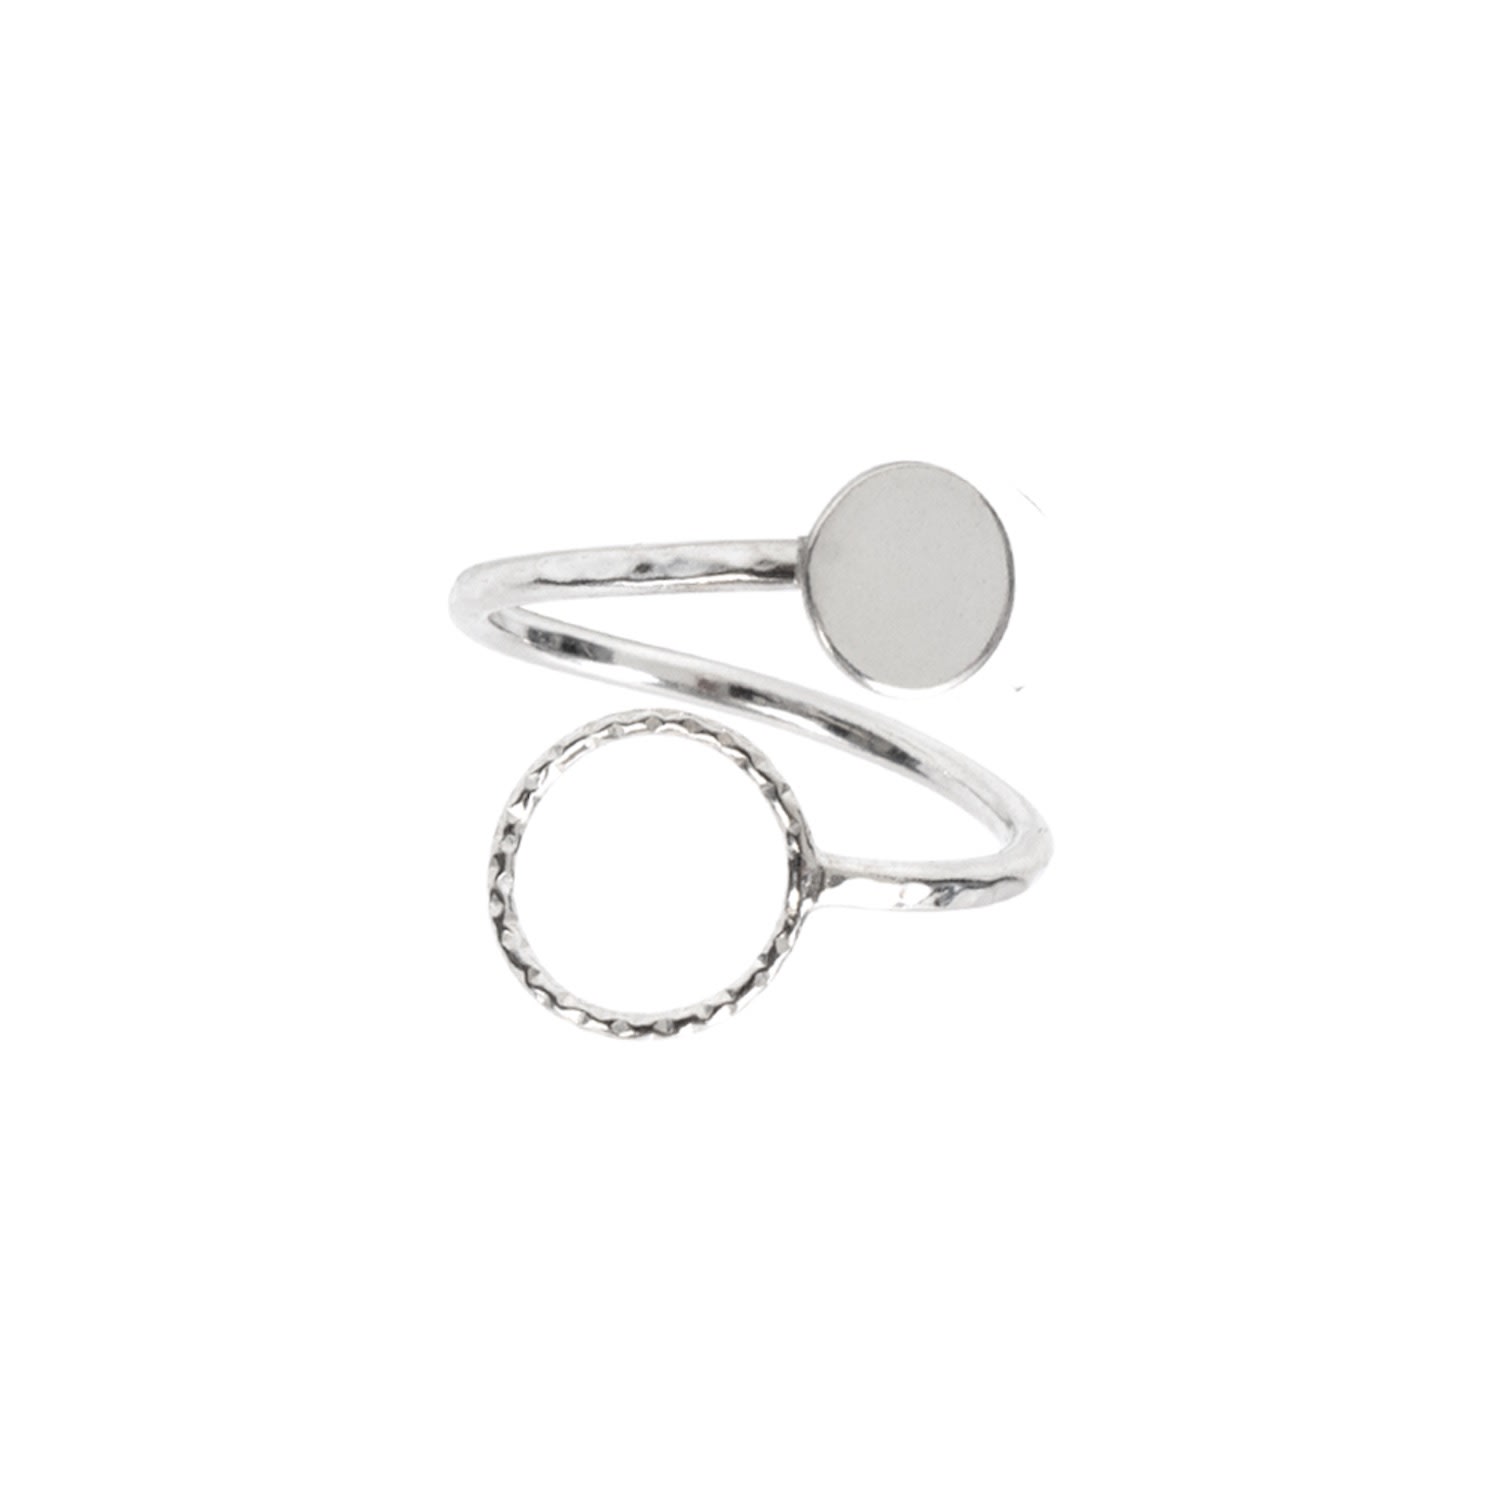 Lucy Ashton Jewellery Women's Artisanal Sterling Silver Circle & Disc Adjustable Ring Lucy Ashton Jewellery